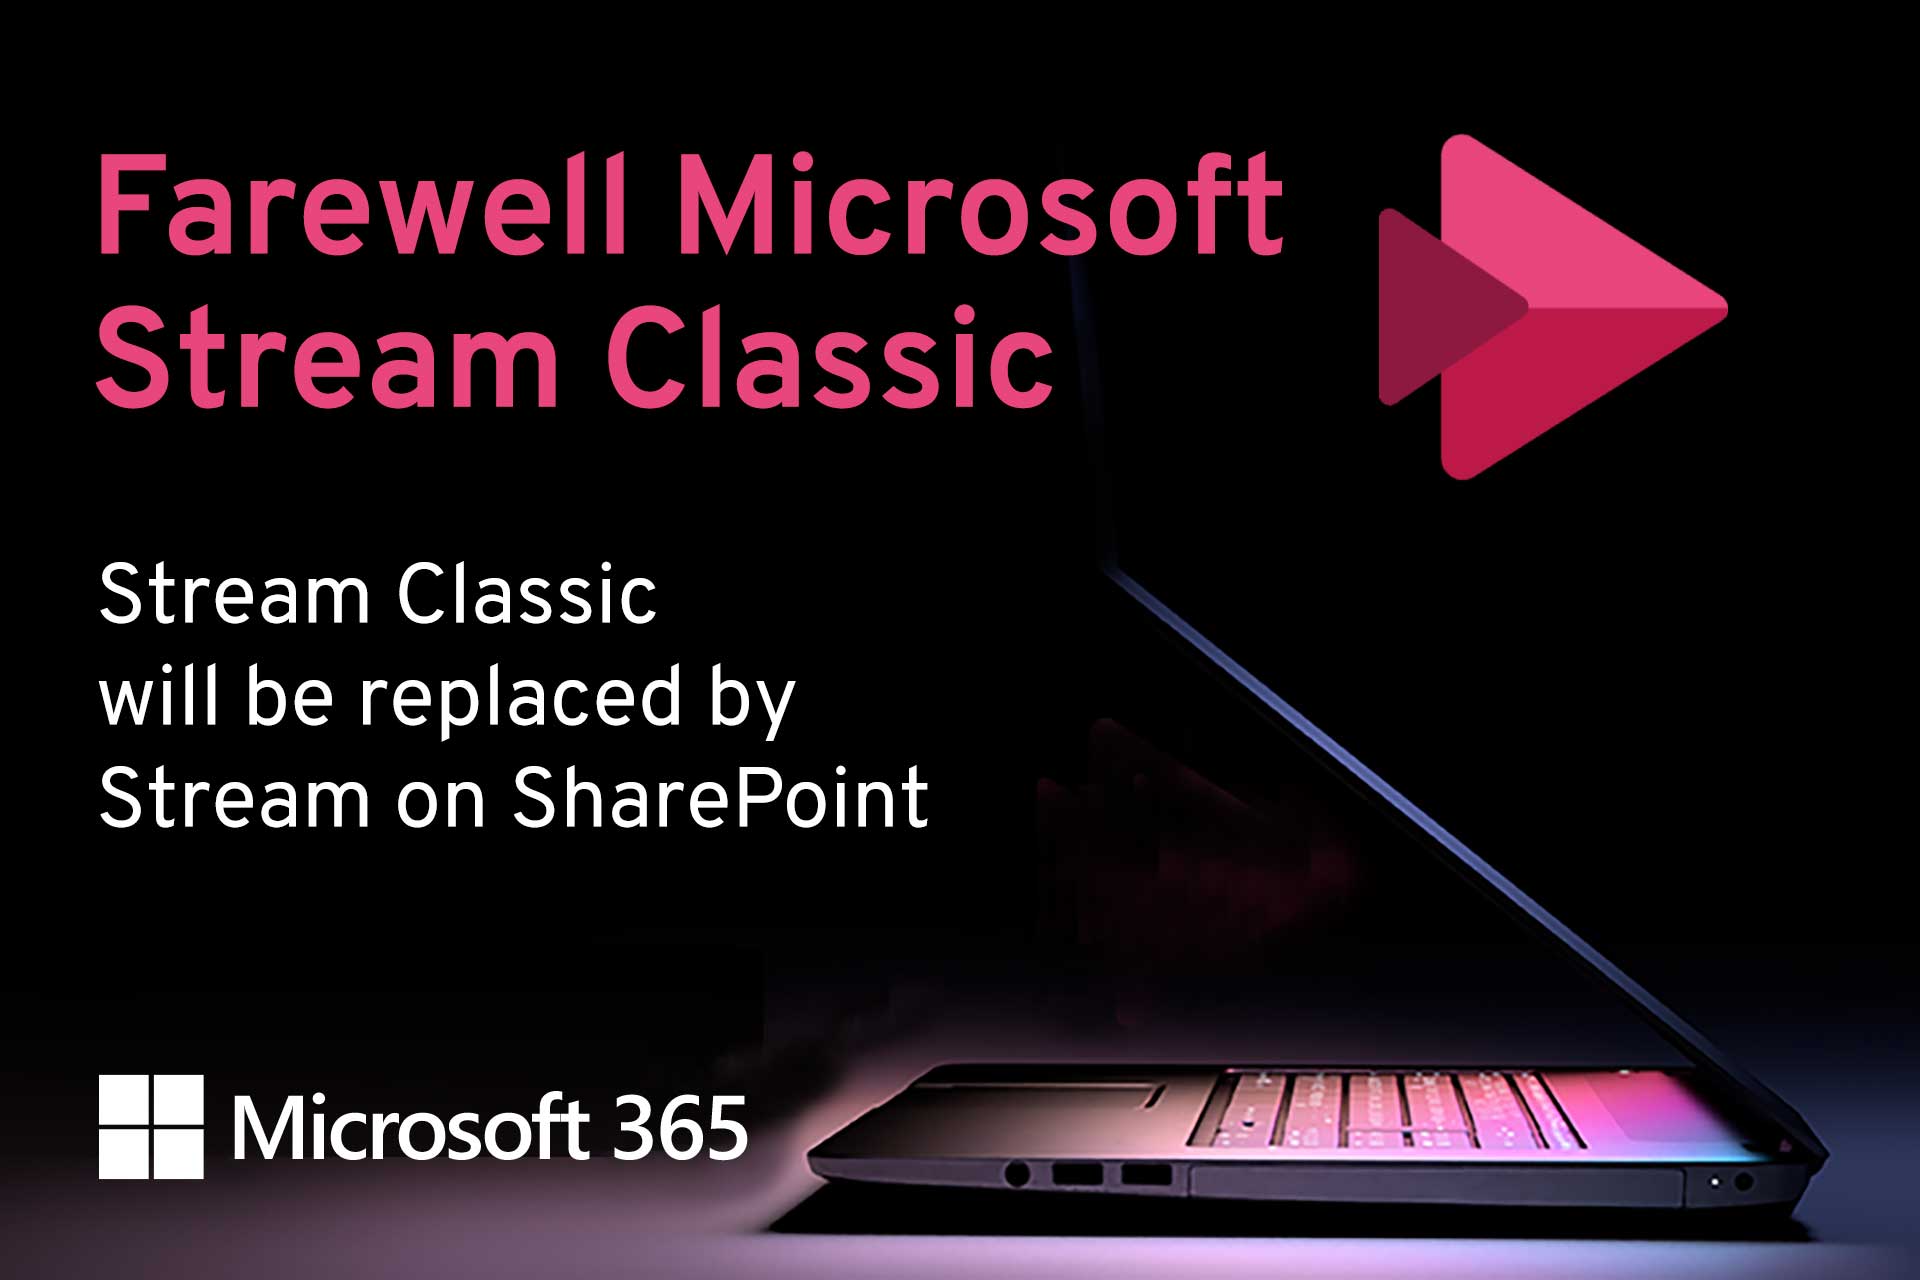 Microsoft Stream Classic to be replaced by Stream on SharePoint